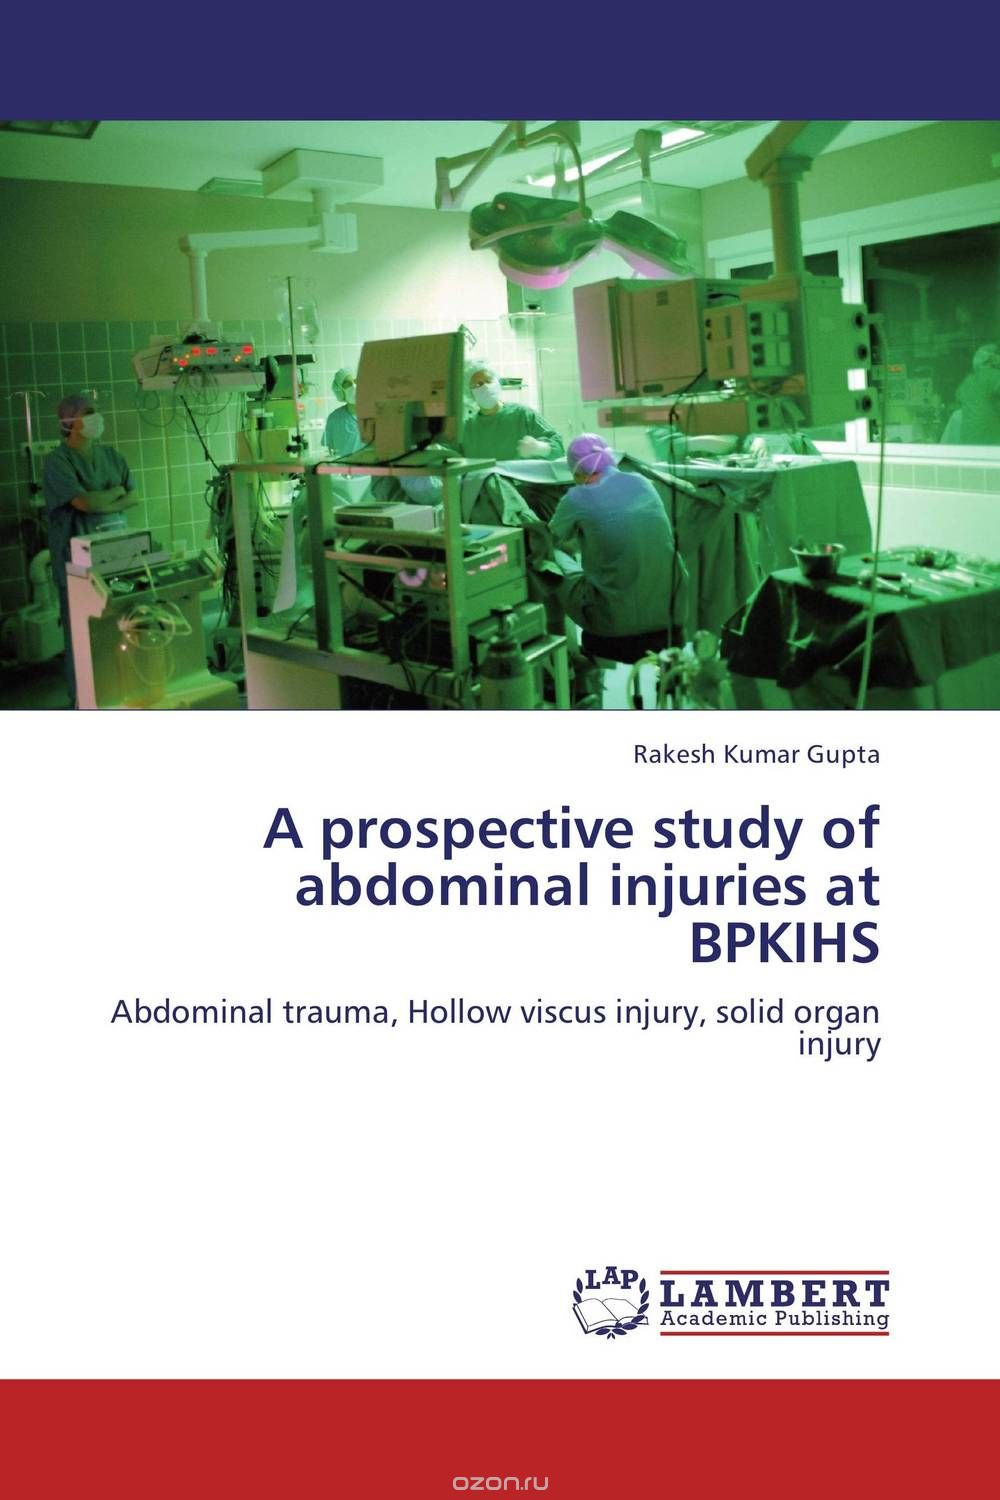 A prospective study of abdominal injuries at BPKIHS